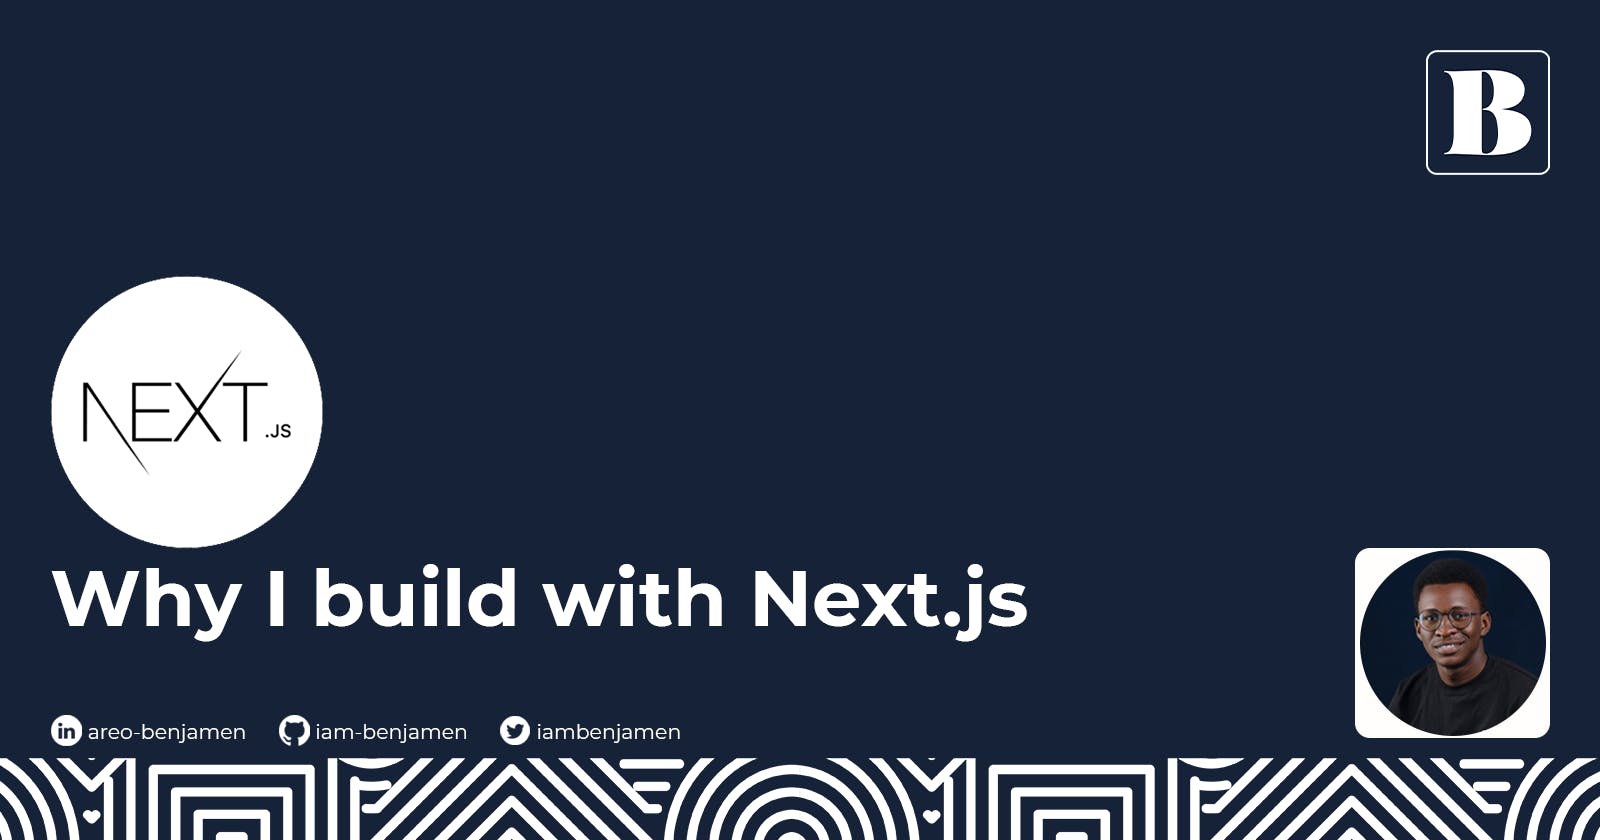 Why I build with Next.js